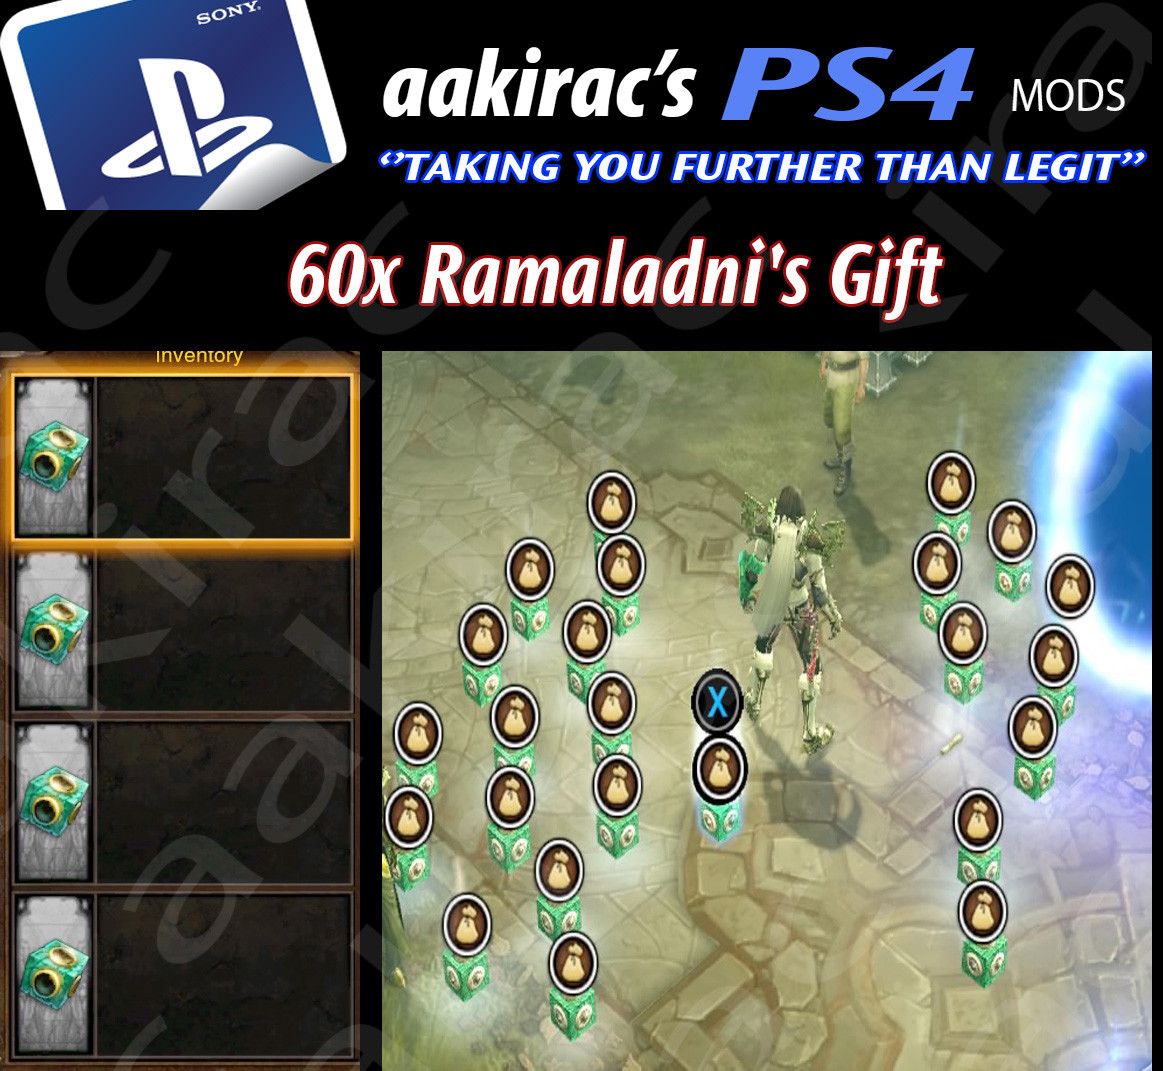 Ramaladi's Gift Diablo 3 Mods ROS Seasonal and Non Seasonal Save Mod - Modded Items and Gear - Hacks - Cheats - Trainers for Playstation 4 - Playstation 5 - Nintendo Switch - Xbox One